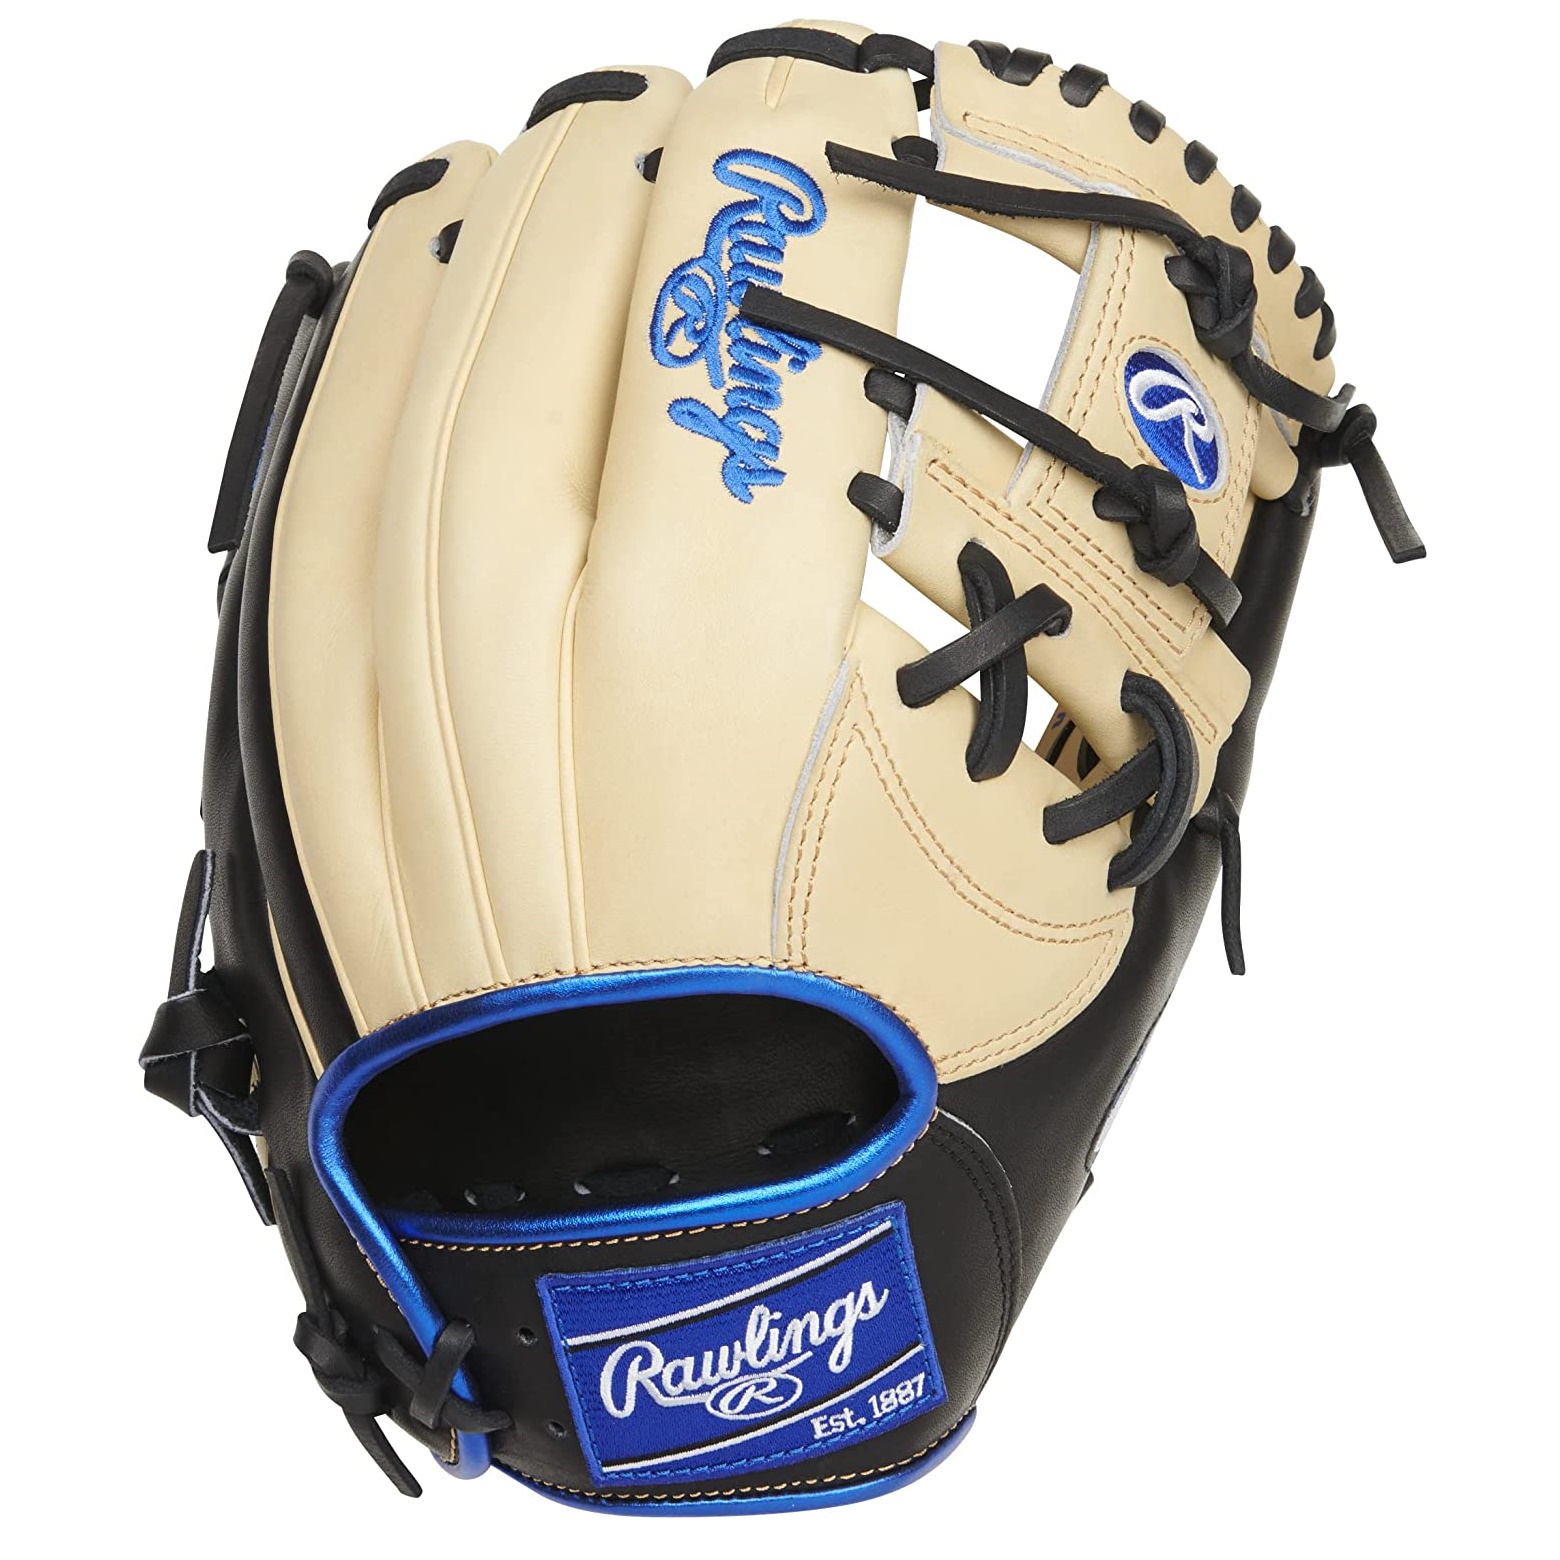 rawlings-heart-of-the-hide-baseball-glove-11-5-i-web-camel-black-royal-right-hand-throw PRONP4-2CR-RightHandThrow Rawlings  <ul> <li><span style=font-size large;><span class=attr-label>Back </span>Conventional</span></li> <li><span style=font-size large;><span class=attr-label>Fit </span>Standard</span></li> <li><span style=font-size